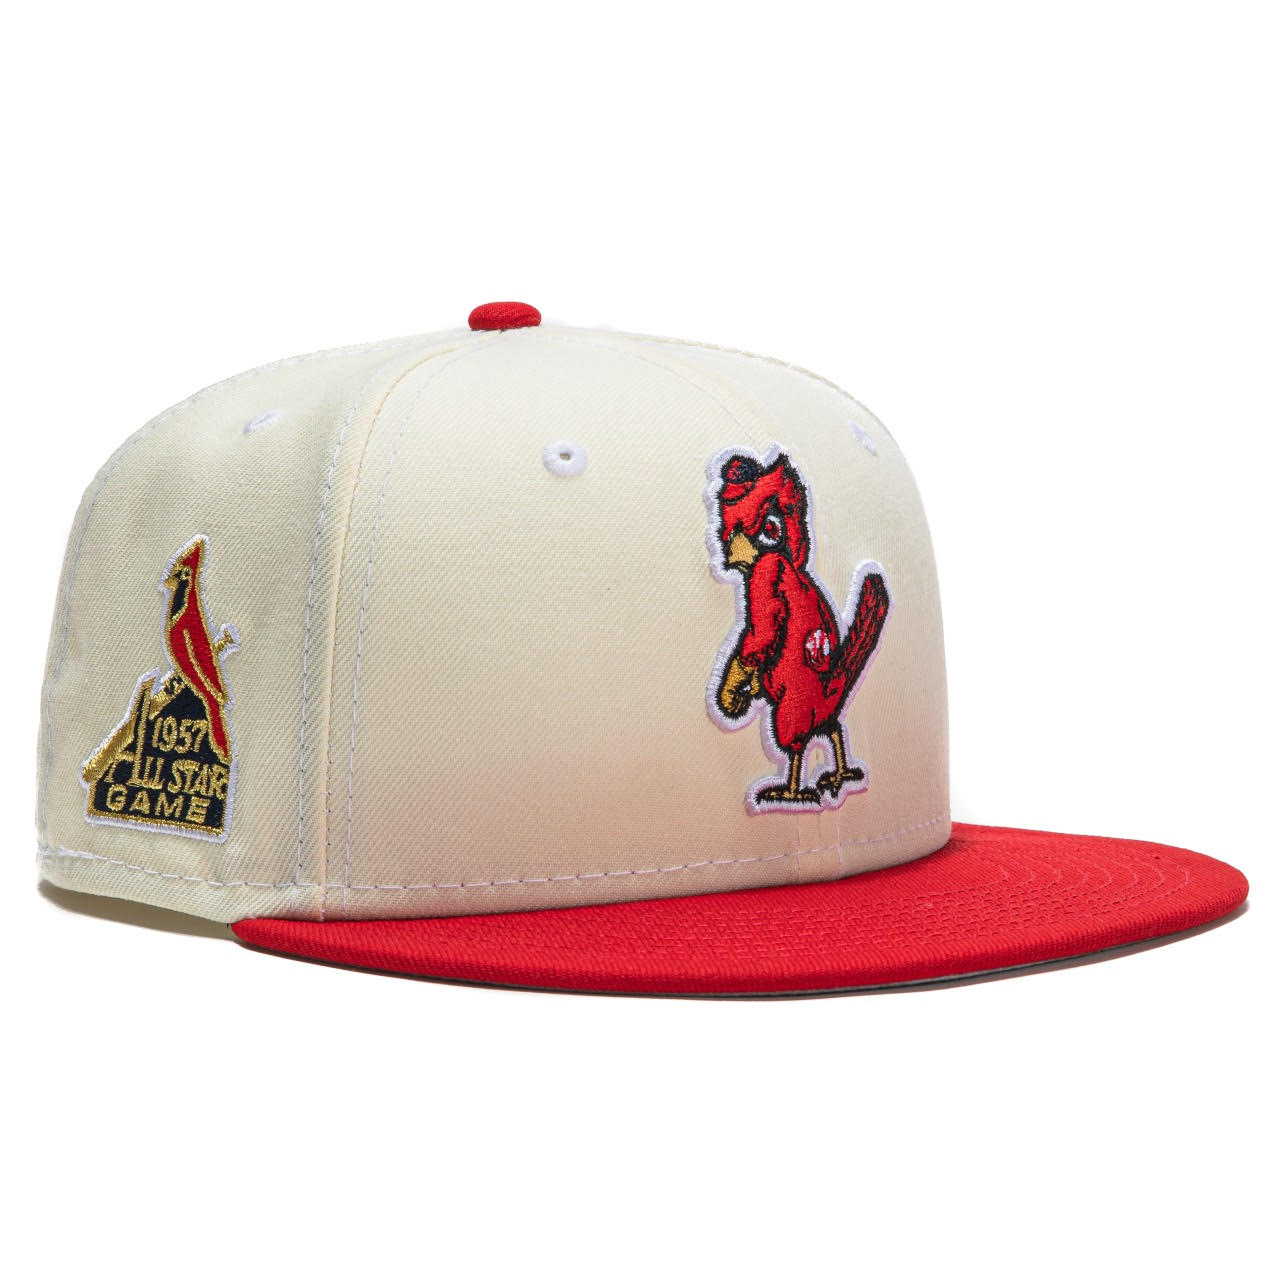 New Era Exclusive 59th White Dome St Louis Cardinals 1957 All Star Game Patch Hat